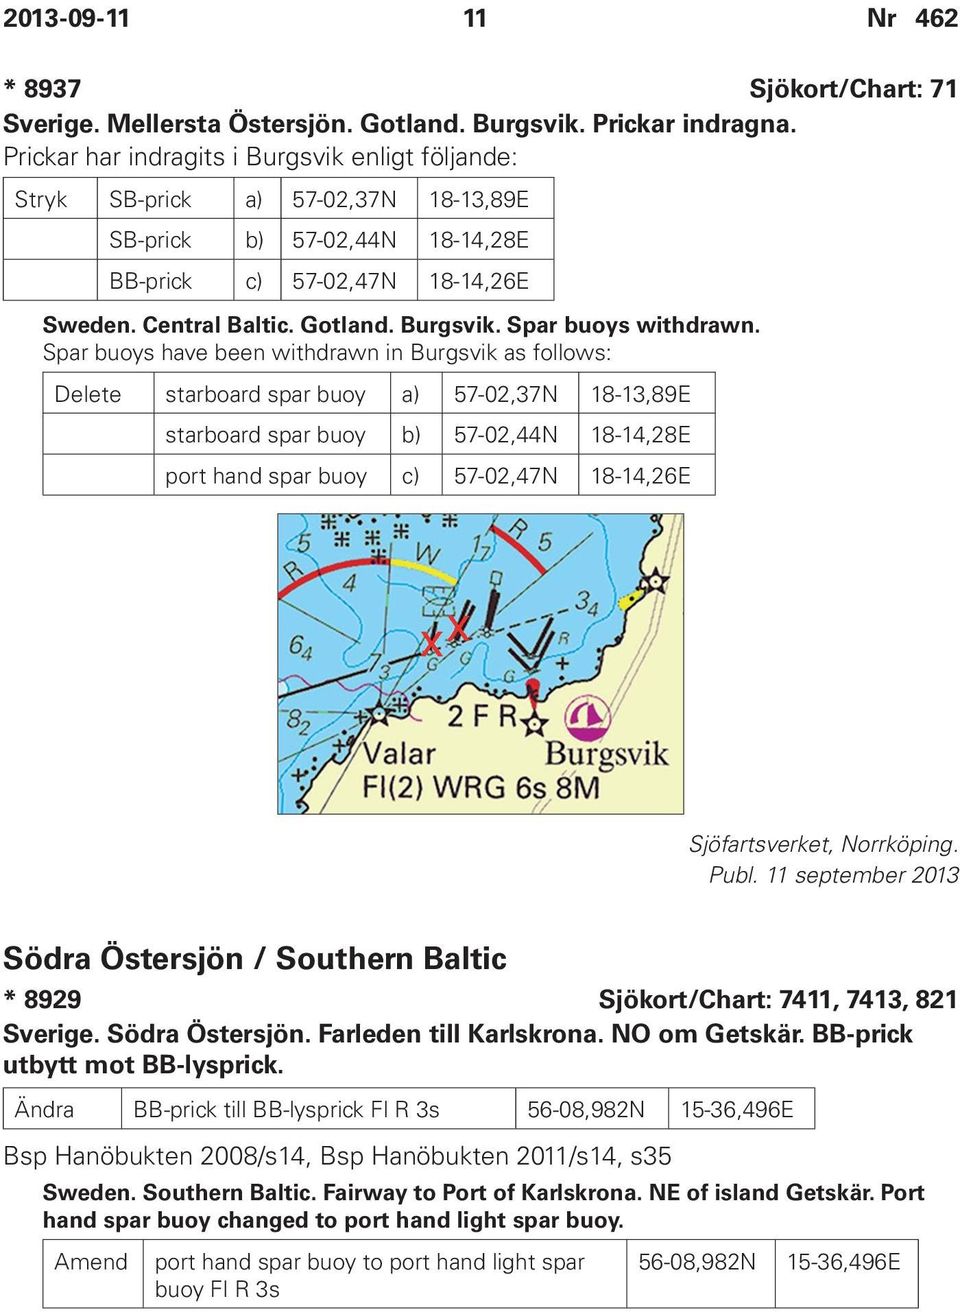 Spar buoys have been withdrawn in Burgsvik as follows: Delete starboard spar buoy a) 57-02,37N 18-13,89E starboard spar buoy b) 57-02,44N 18-14,28E port hand spar buoy c) 57-02,47N 18-14,26E